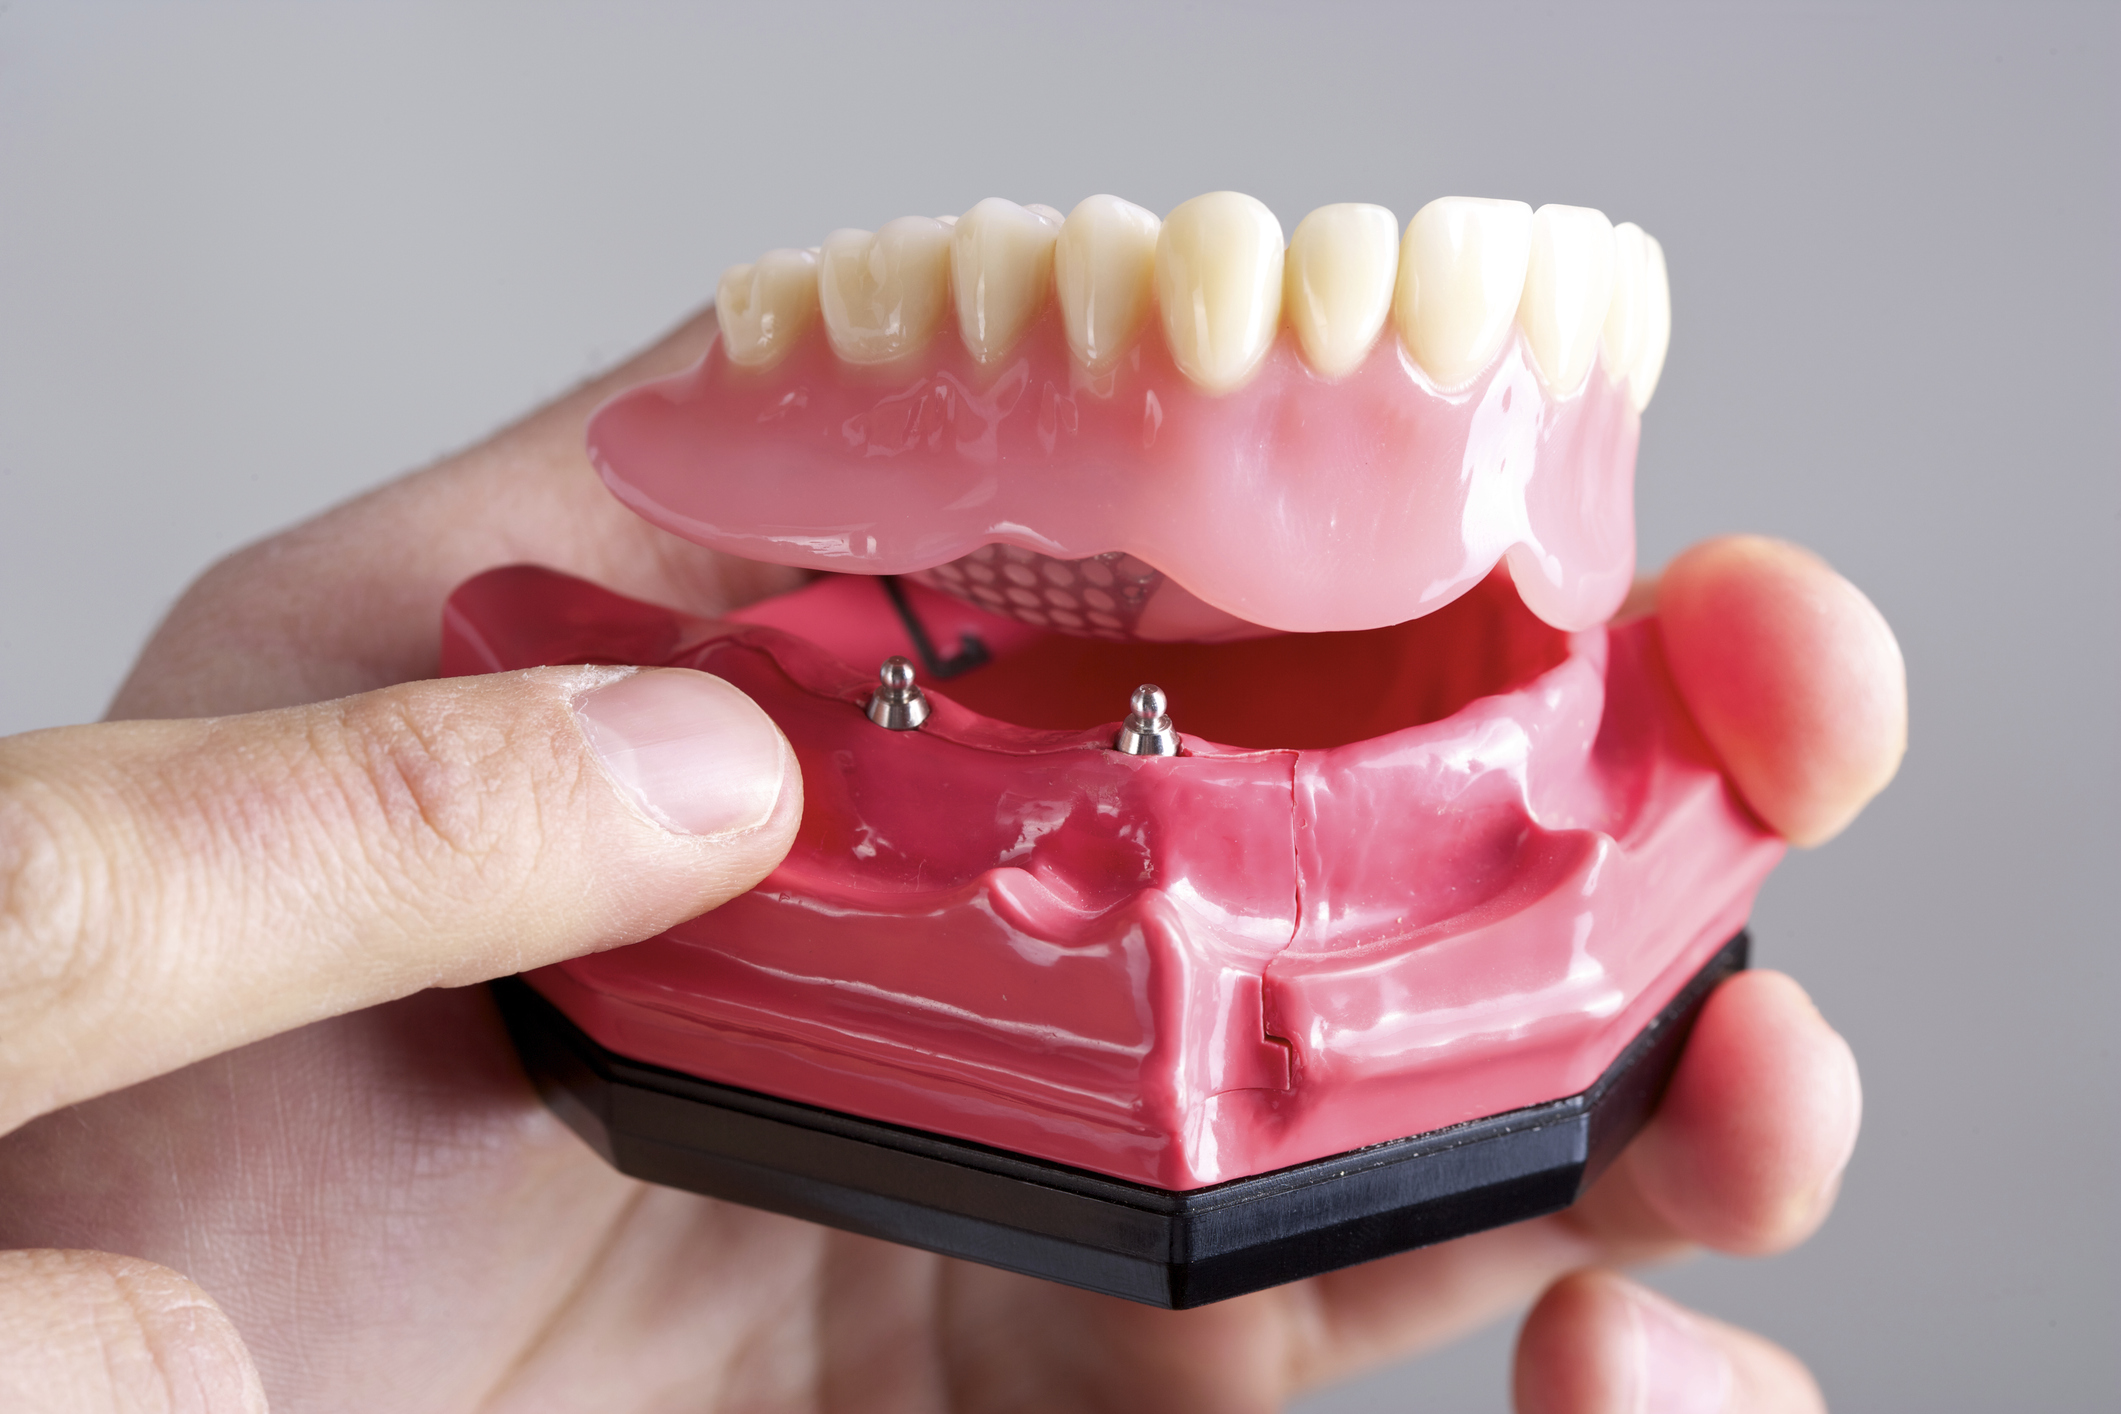 Hand pointing to model of All-on-4 implant denture